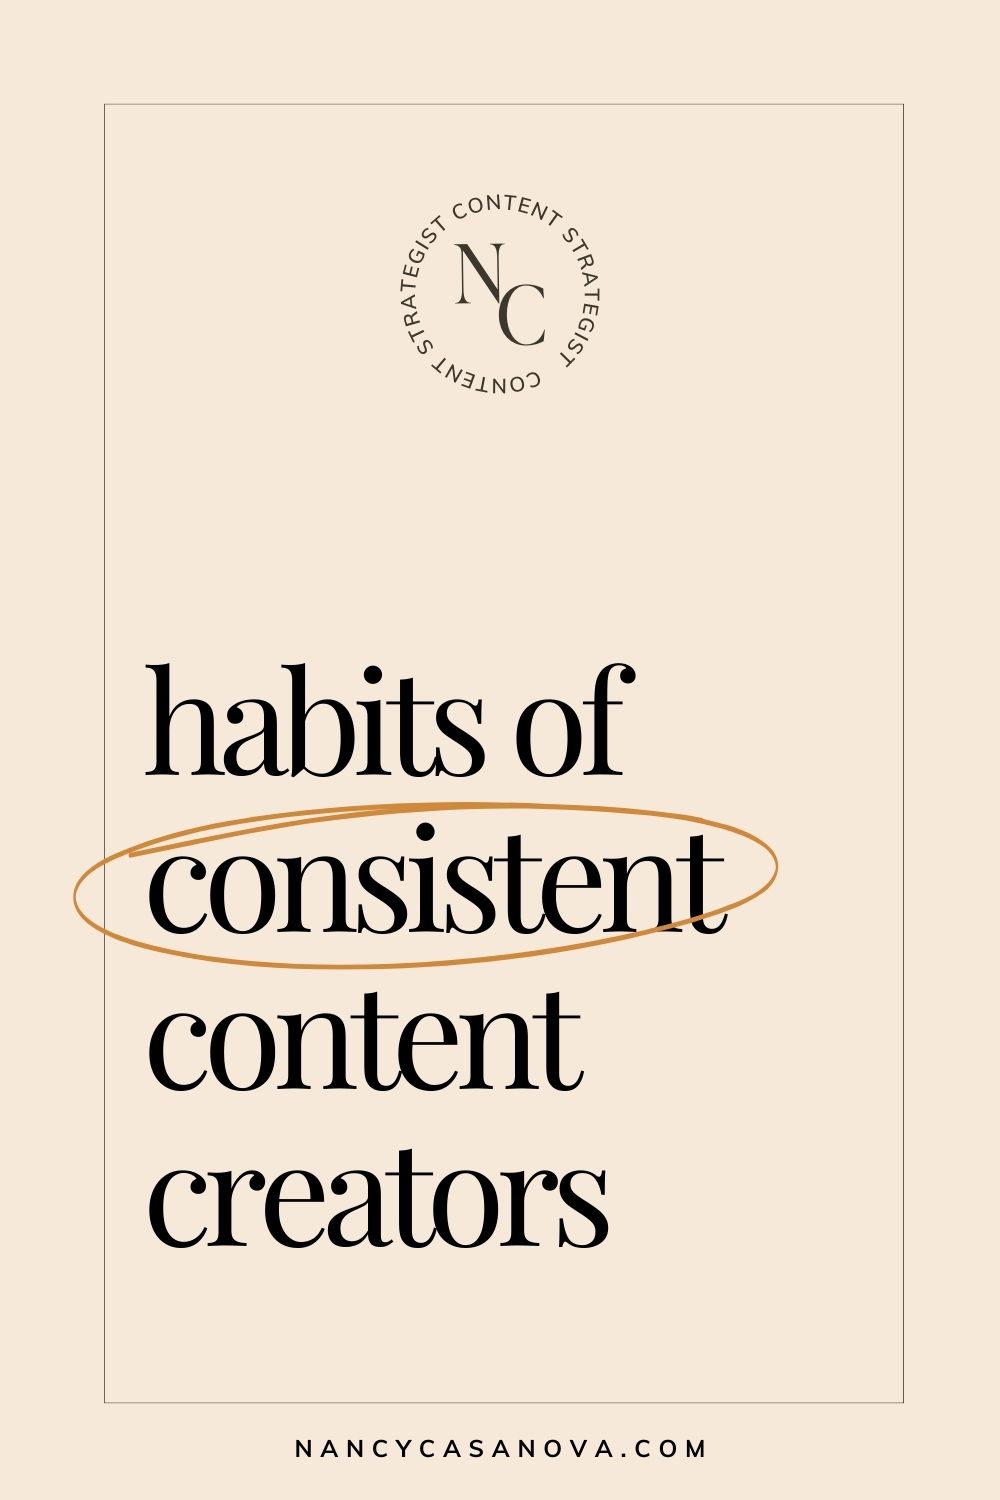 Want to be more consistent on social media, but don't know where to start? Here are some of the habits you can develop that will help you show up more confidently and consistently online. 